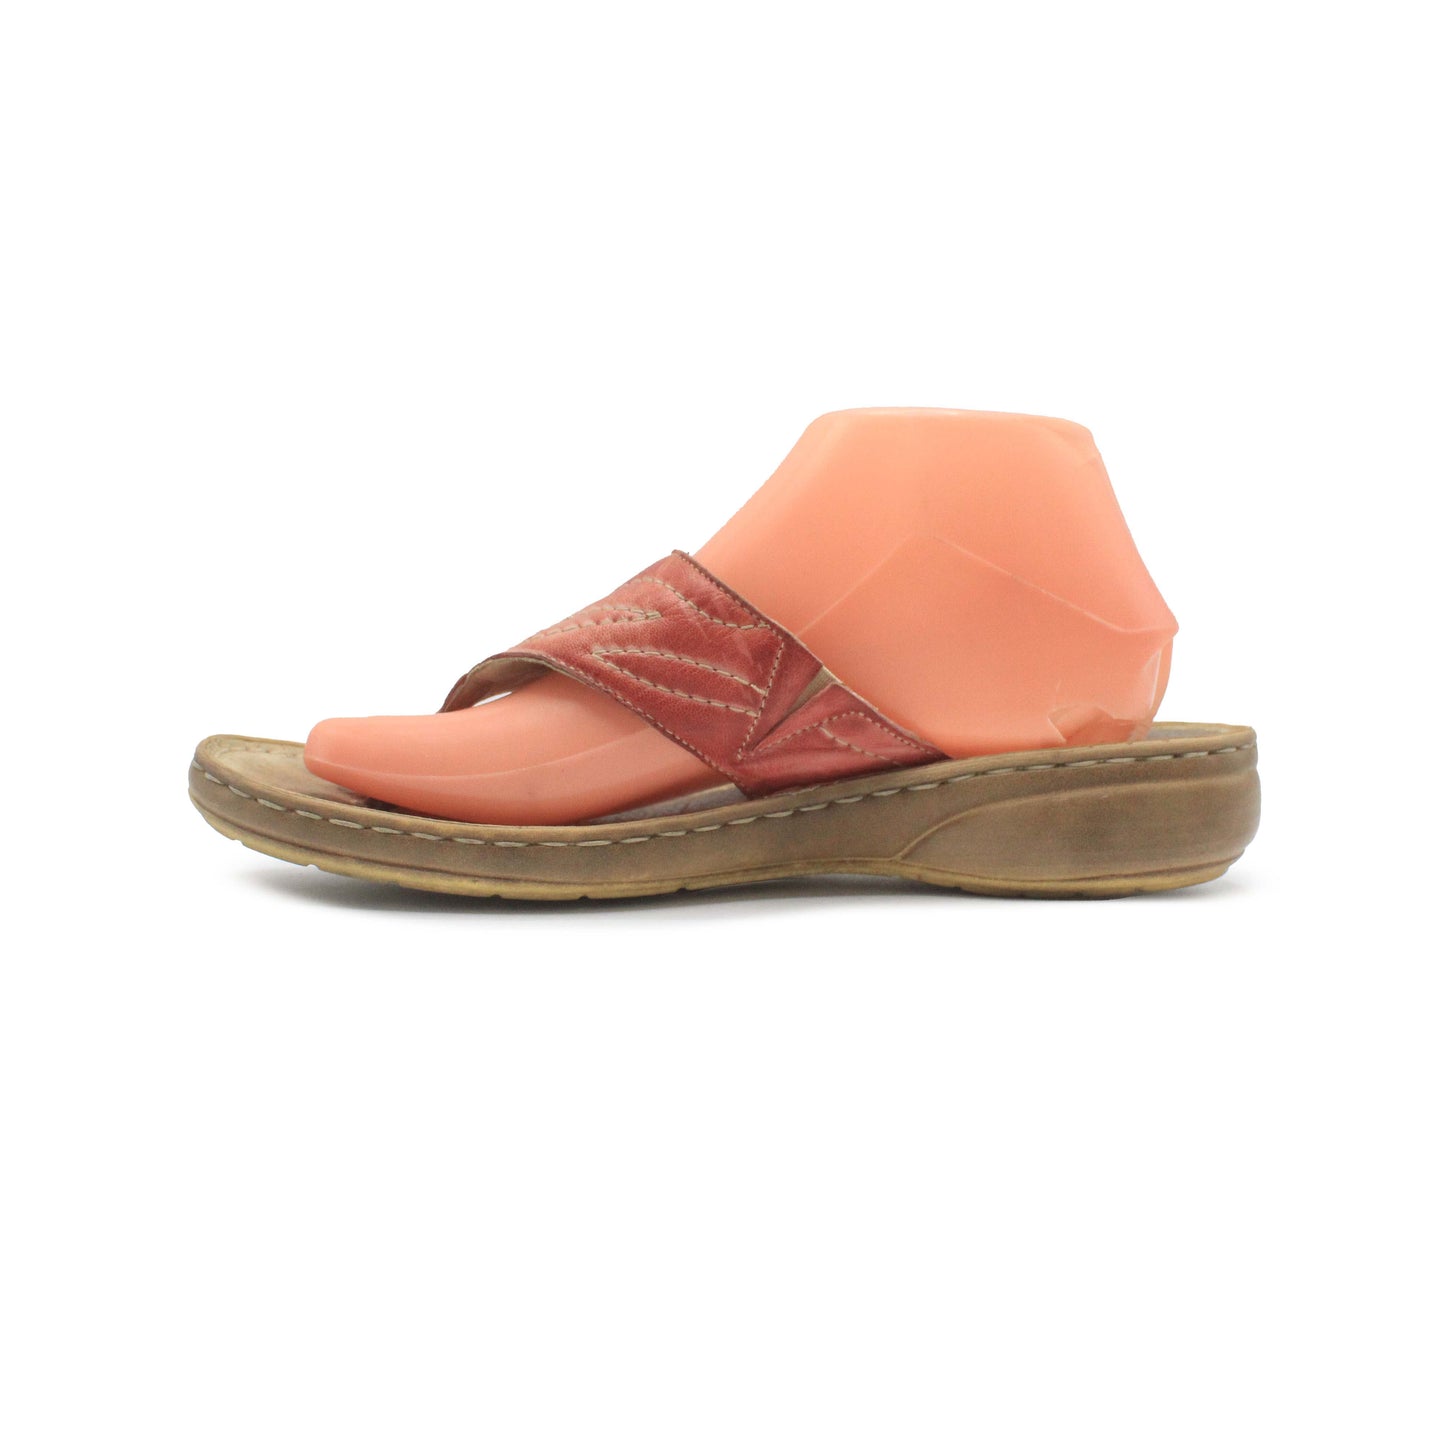 CLASSIC COMFORT WIDE FIT SLIPPERS